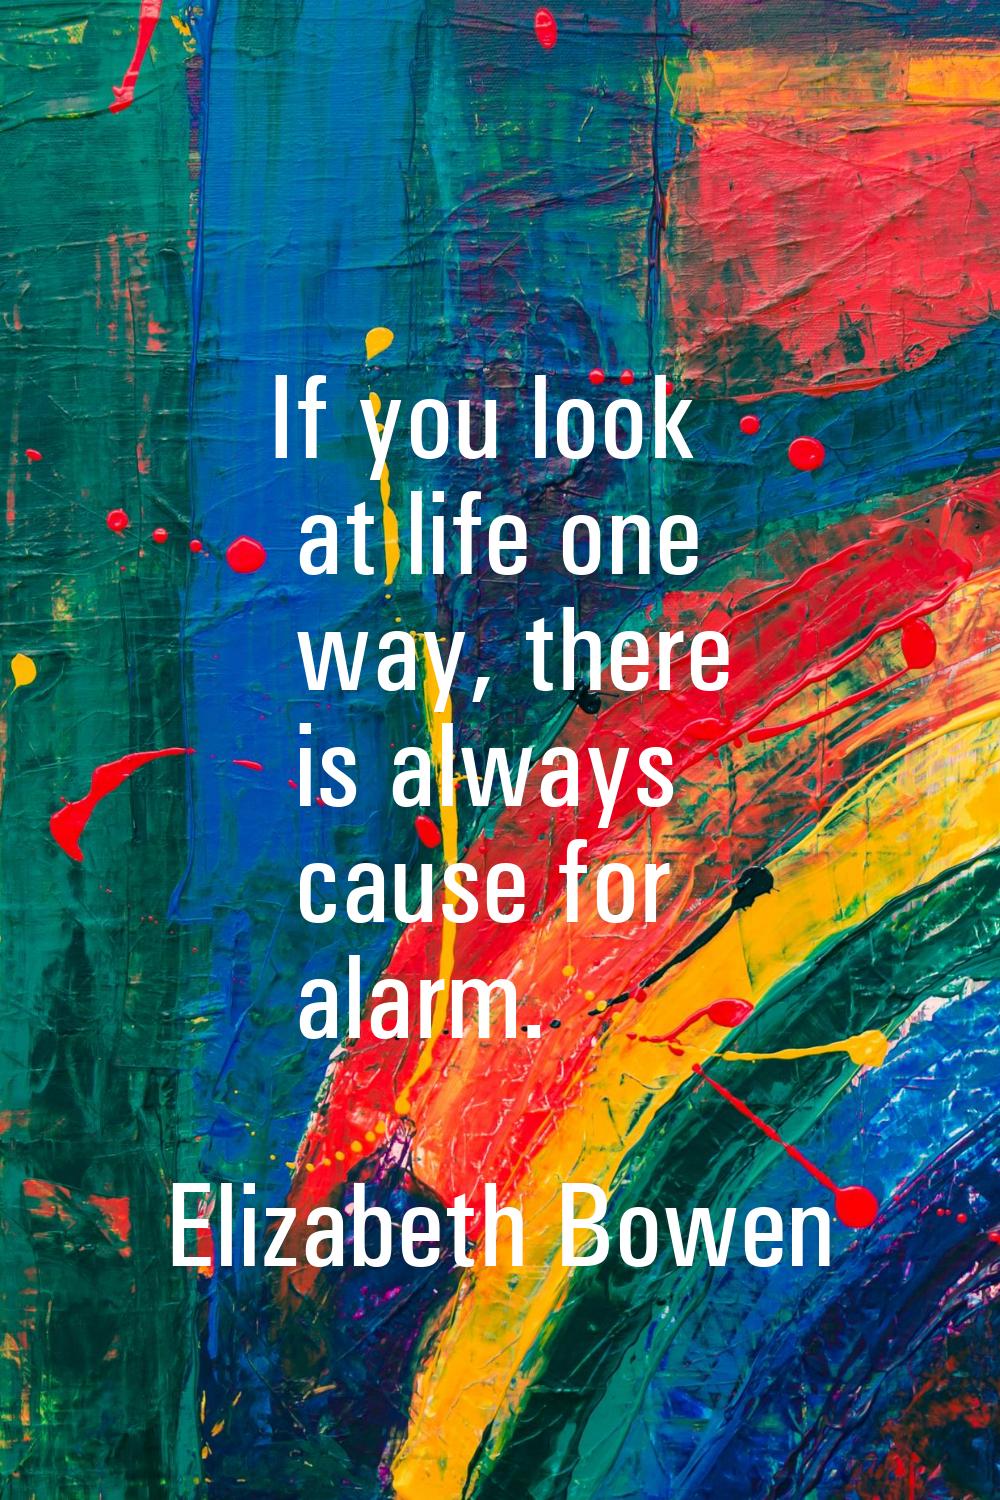 If you look at life one way, there is always cause for alarm.